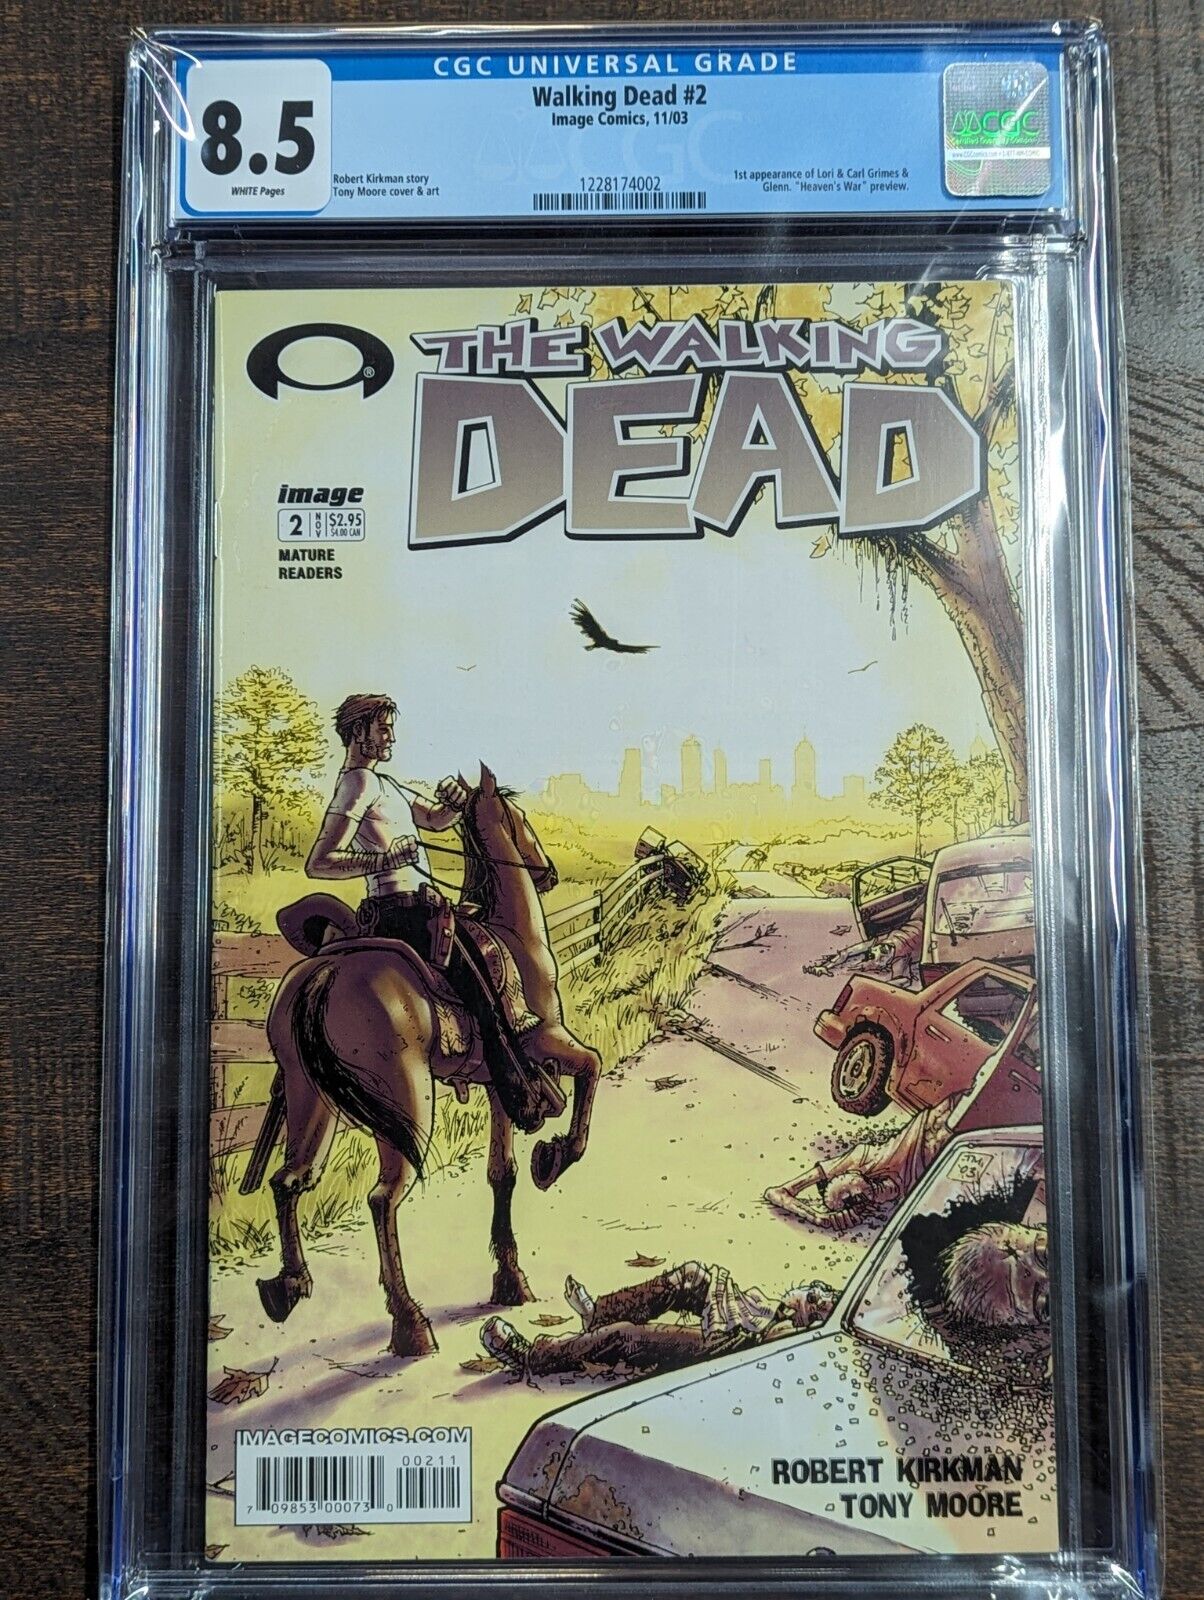 🔥 2003 THE WALKING DEAD #2 CGC Graded 8.5 🔑 MAJOR Key Issue Image Comic Book